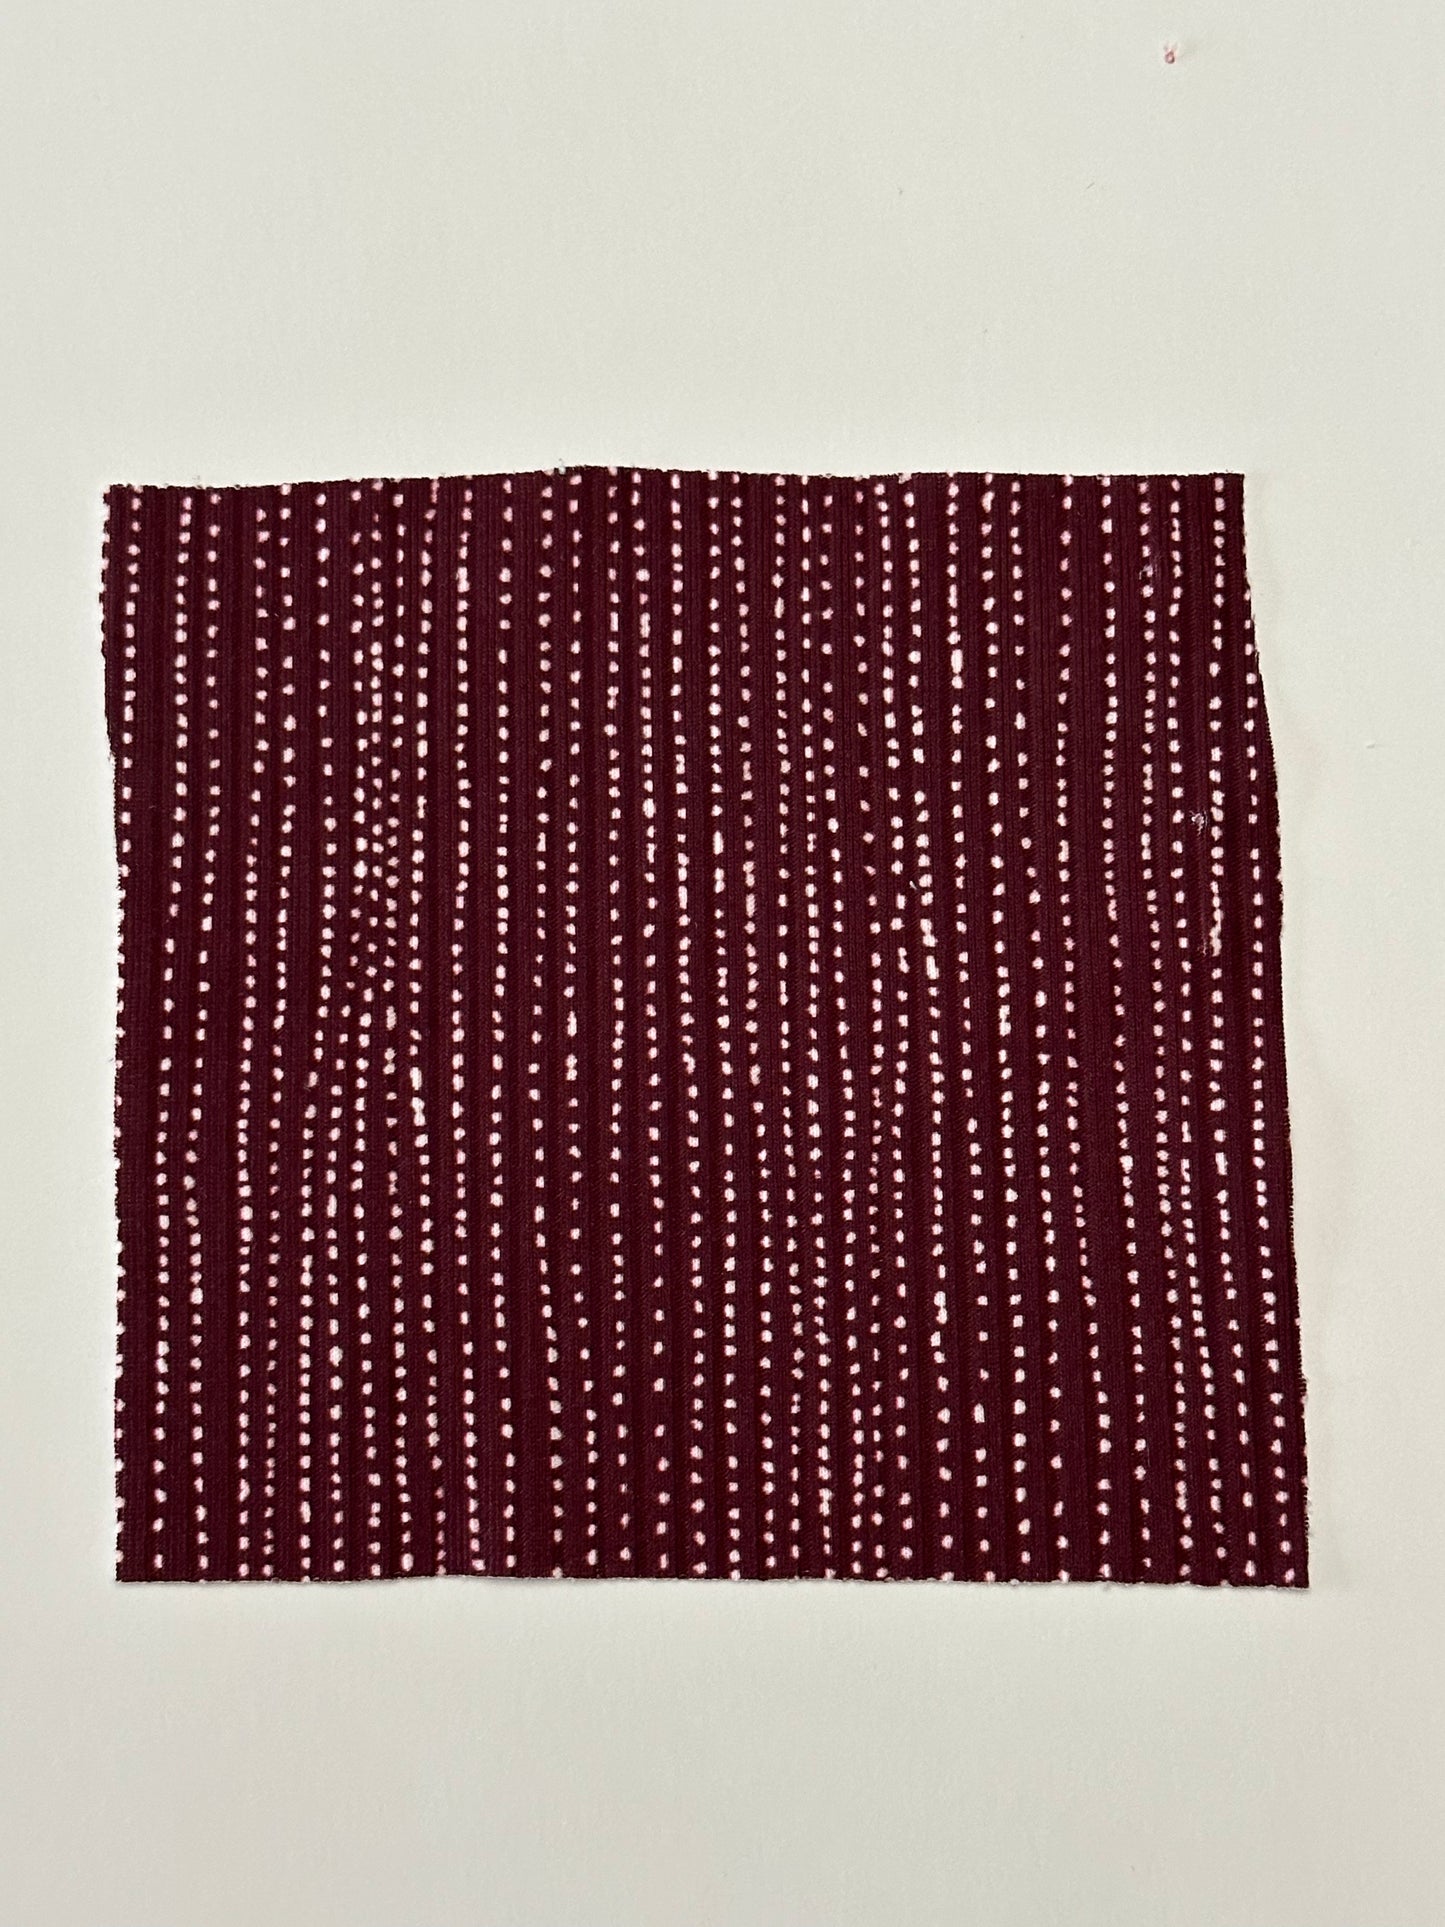 Pre-Order Rain Stripes in Burgundy on Unbrushed Rib Knit Fabric Sold by the 1/4 yard